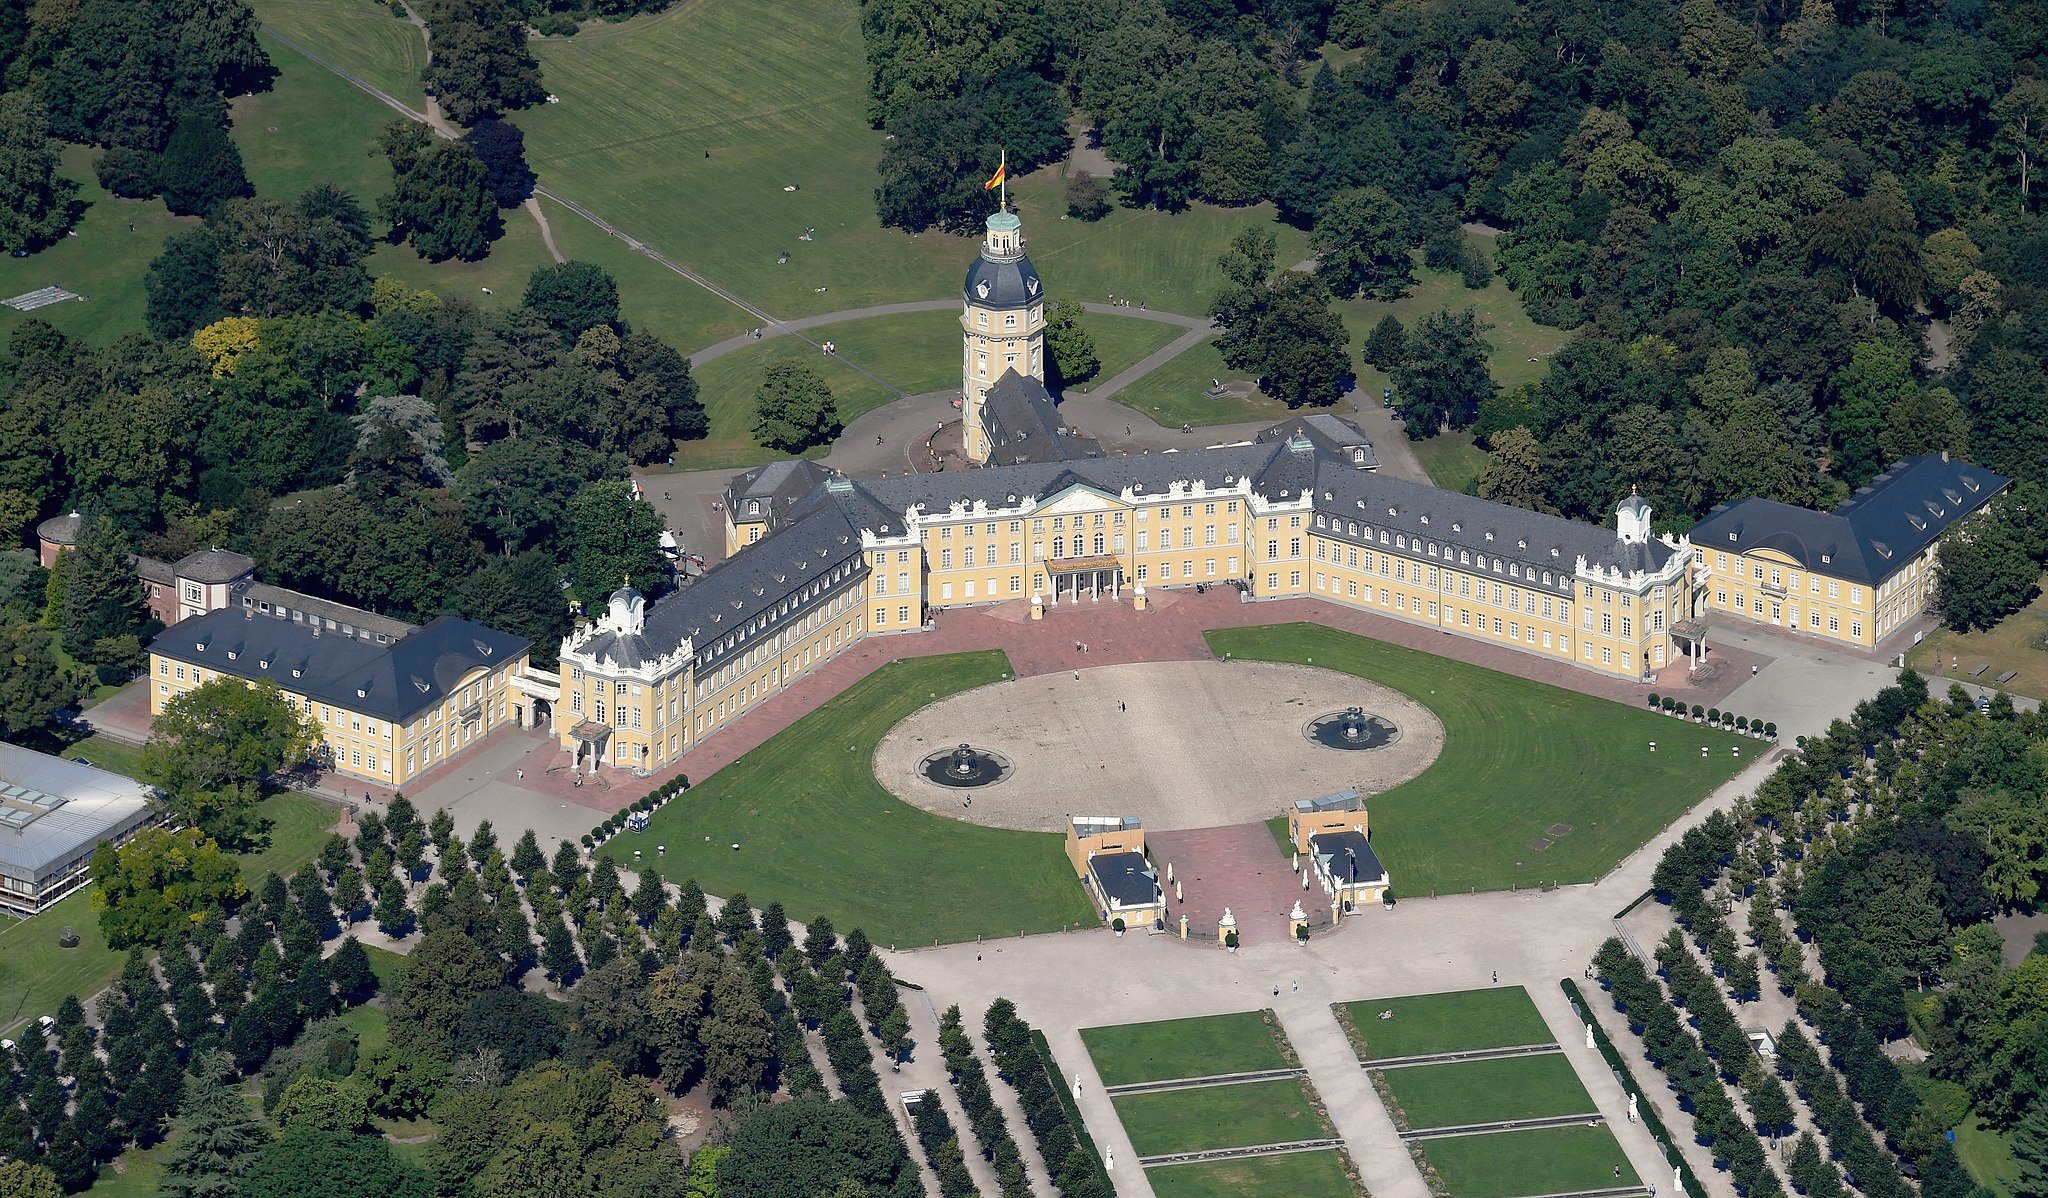 https://commons.wikimedia.org/wiki/File:Aerial_image_of_the_Karlsruhe_Palace_%28view_from_the_southwest%29.jpg